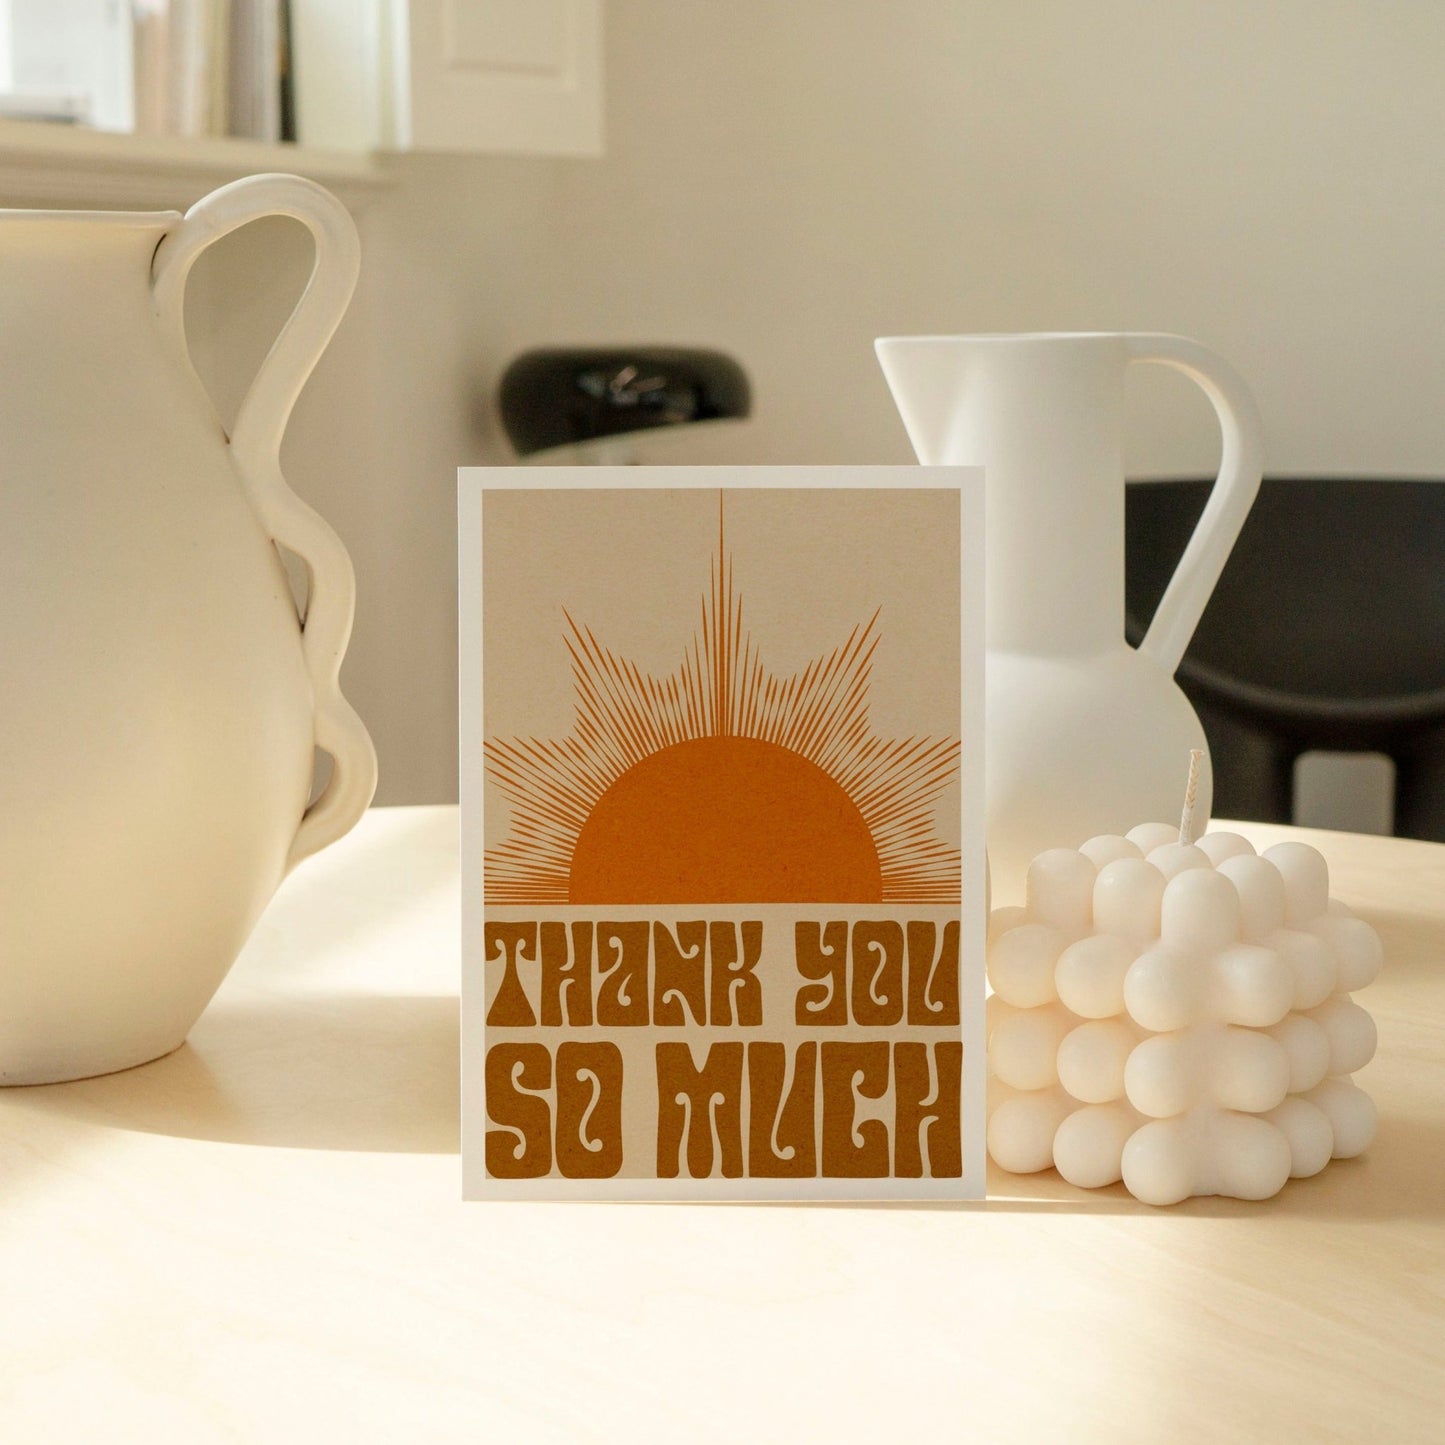 'Thank You' Boho Sun A6 Greetings Card | Fully Recycled - OMG KITTY